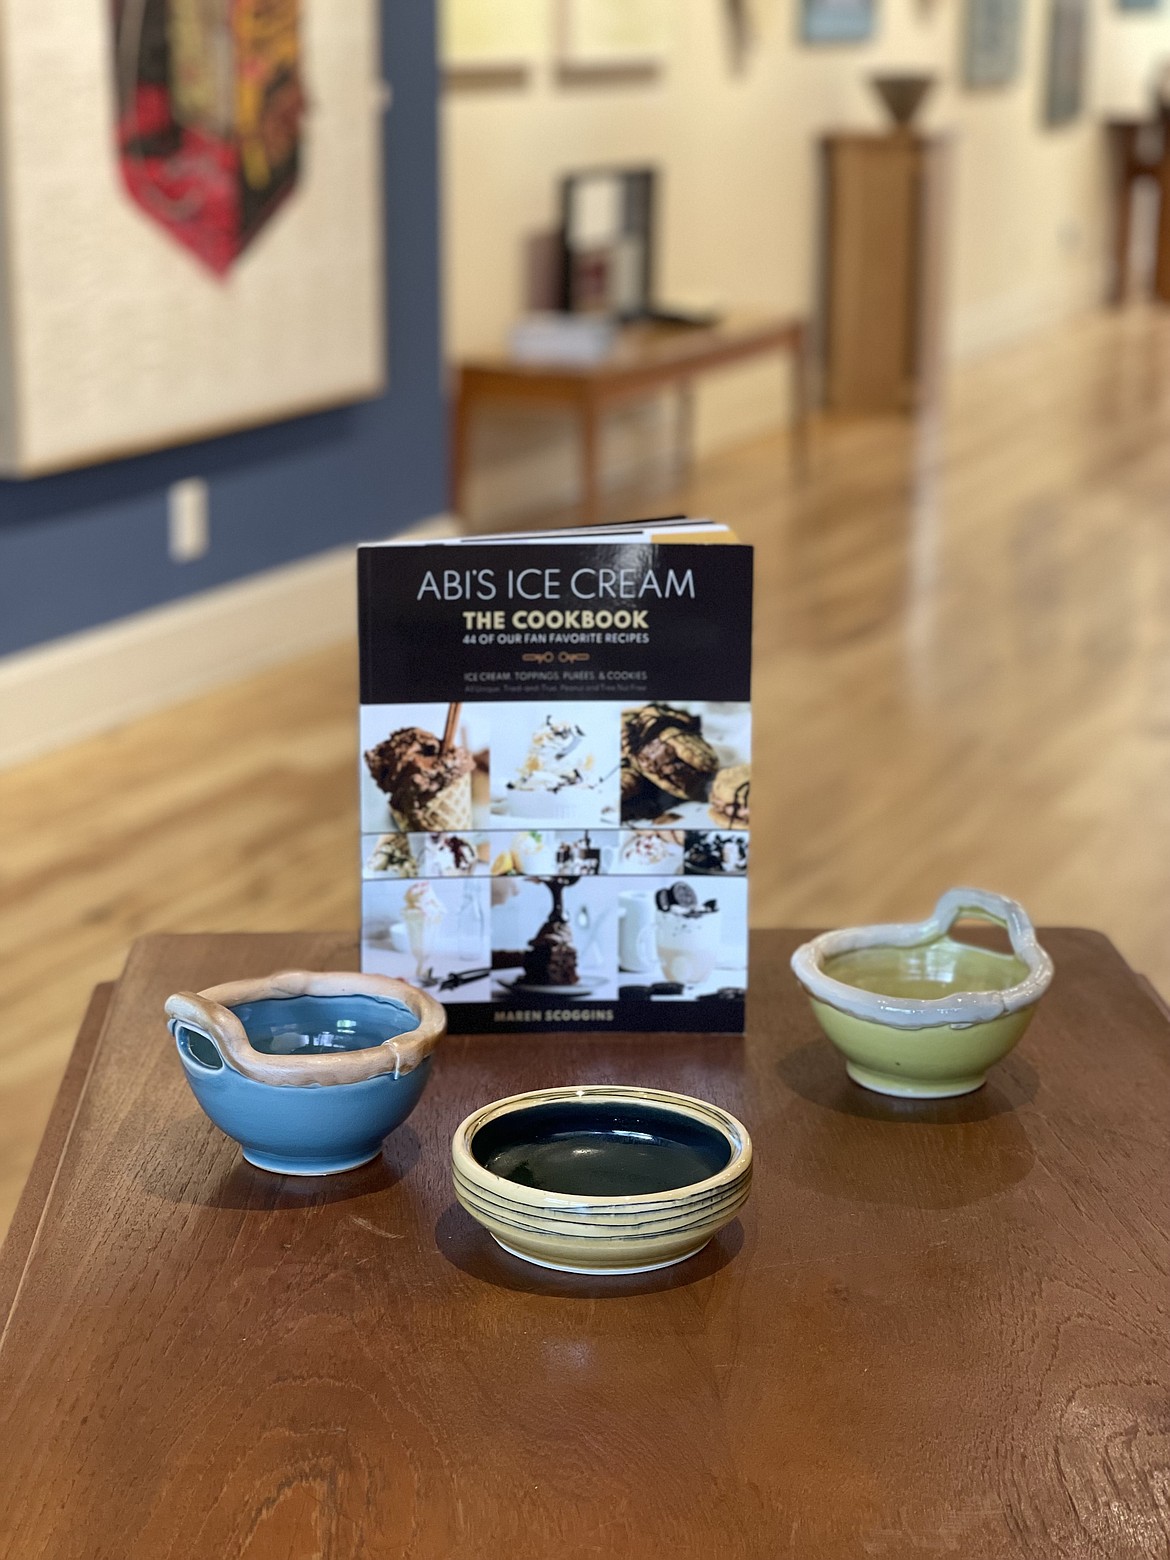 Art Spirit Gallery to host a book launch for Maren Scoggins new “Abi's Ice Cream Cookbook.” The book will include classic combinations from the ice cream parlor, all safe for people with tree nut allergies.